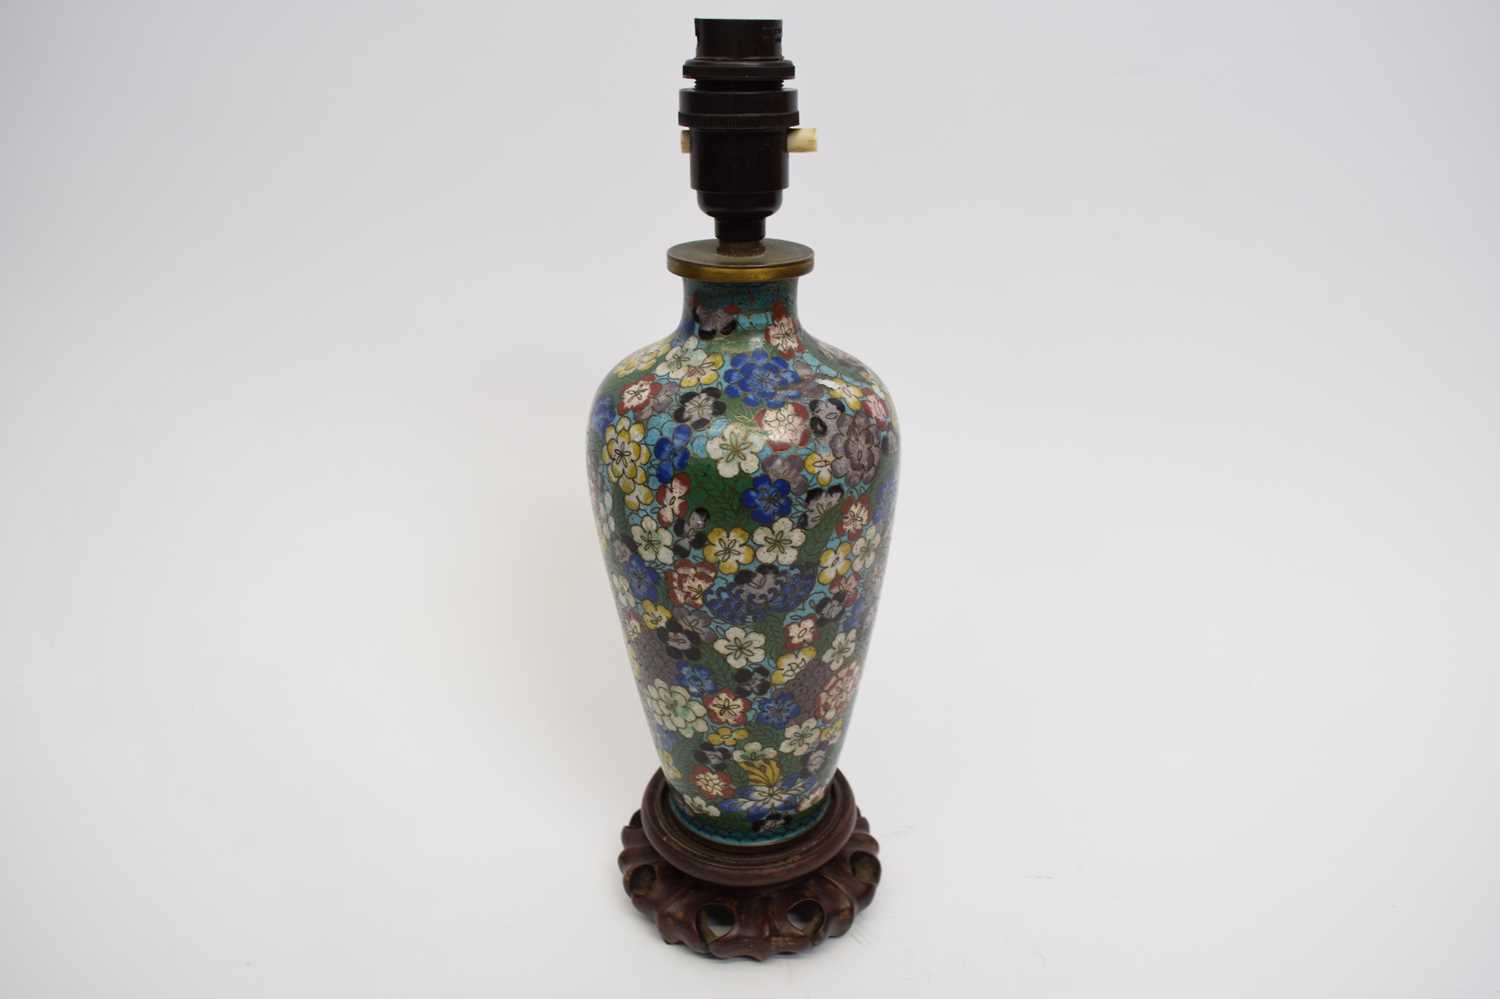 Lot 24 - Enamel vase converted to a lamp